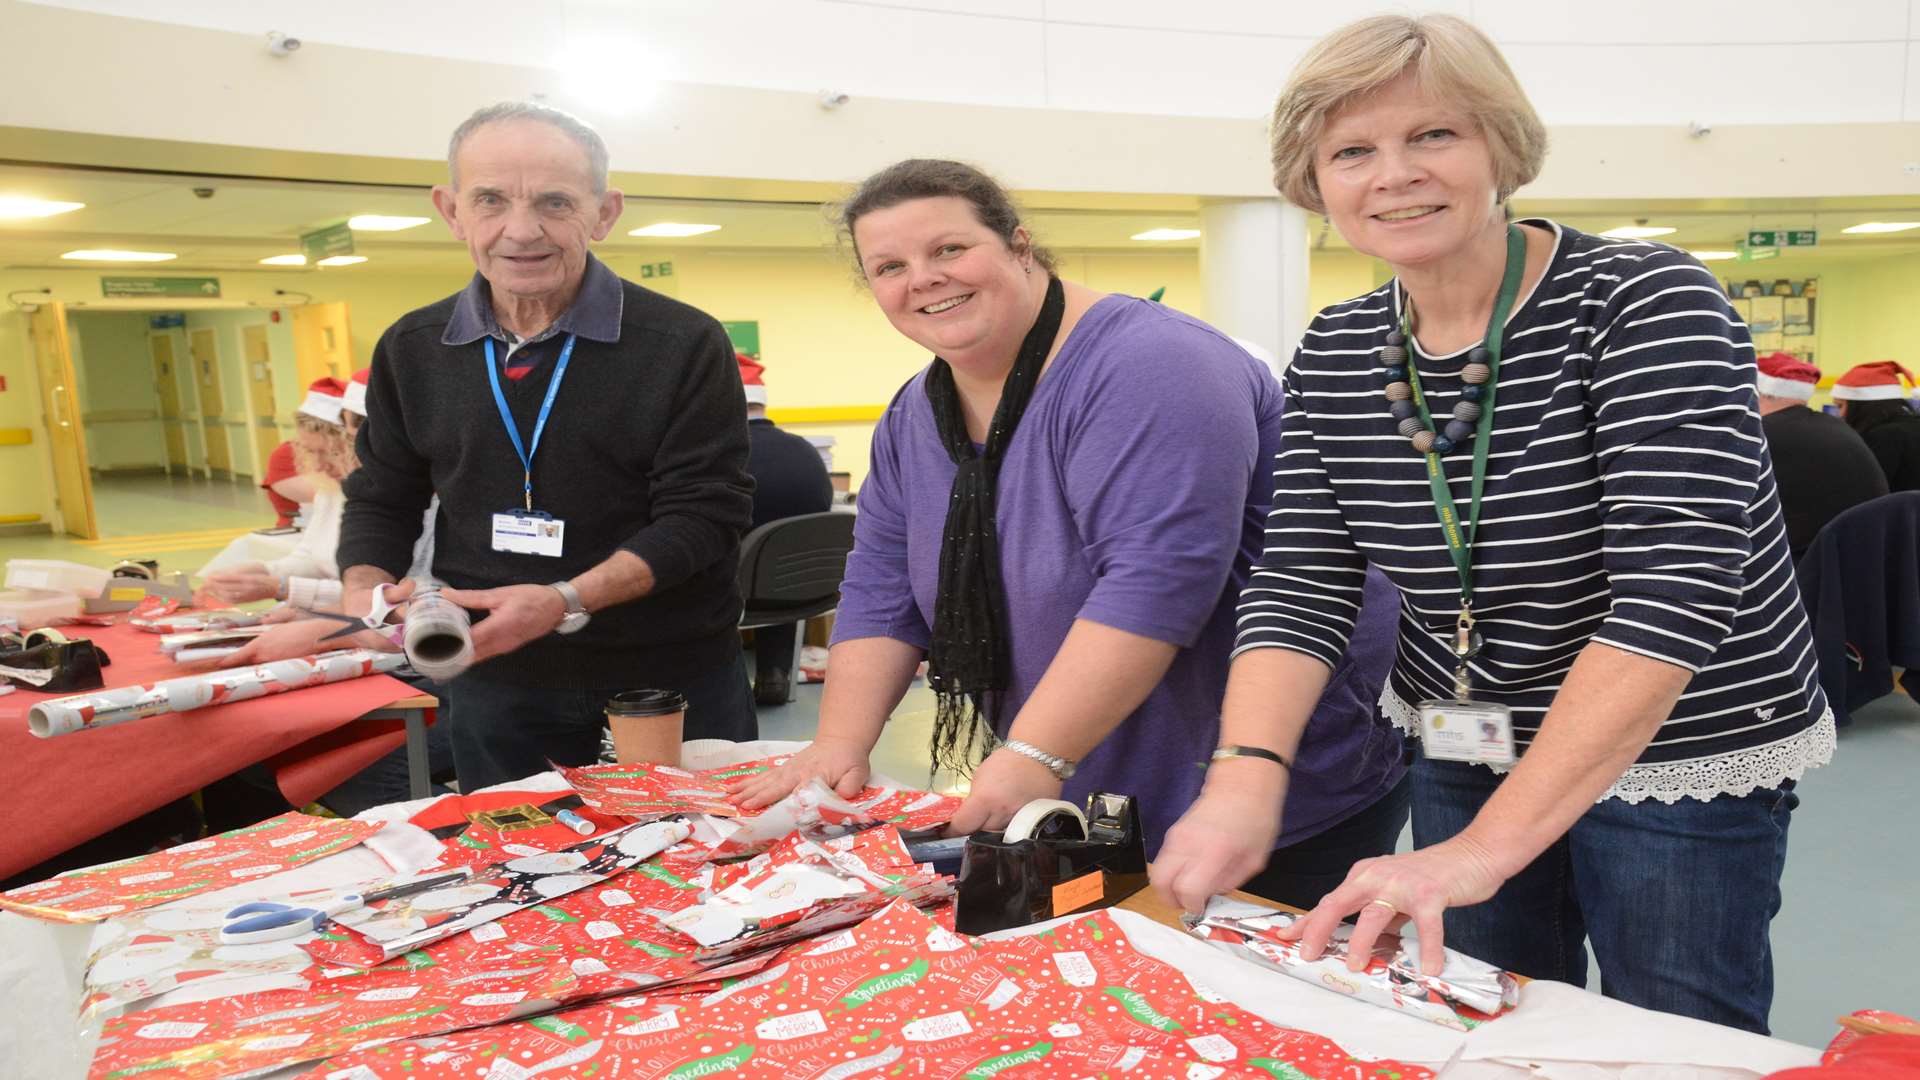 Volunteers Melvyn Goodman, Sarah Shsave and Ann Howton from MHS Homes Volunteers wrapping gifts. Picture: Gary Browne